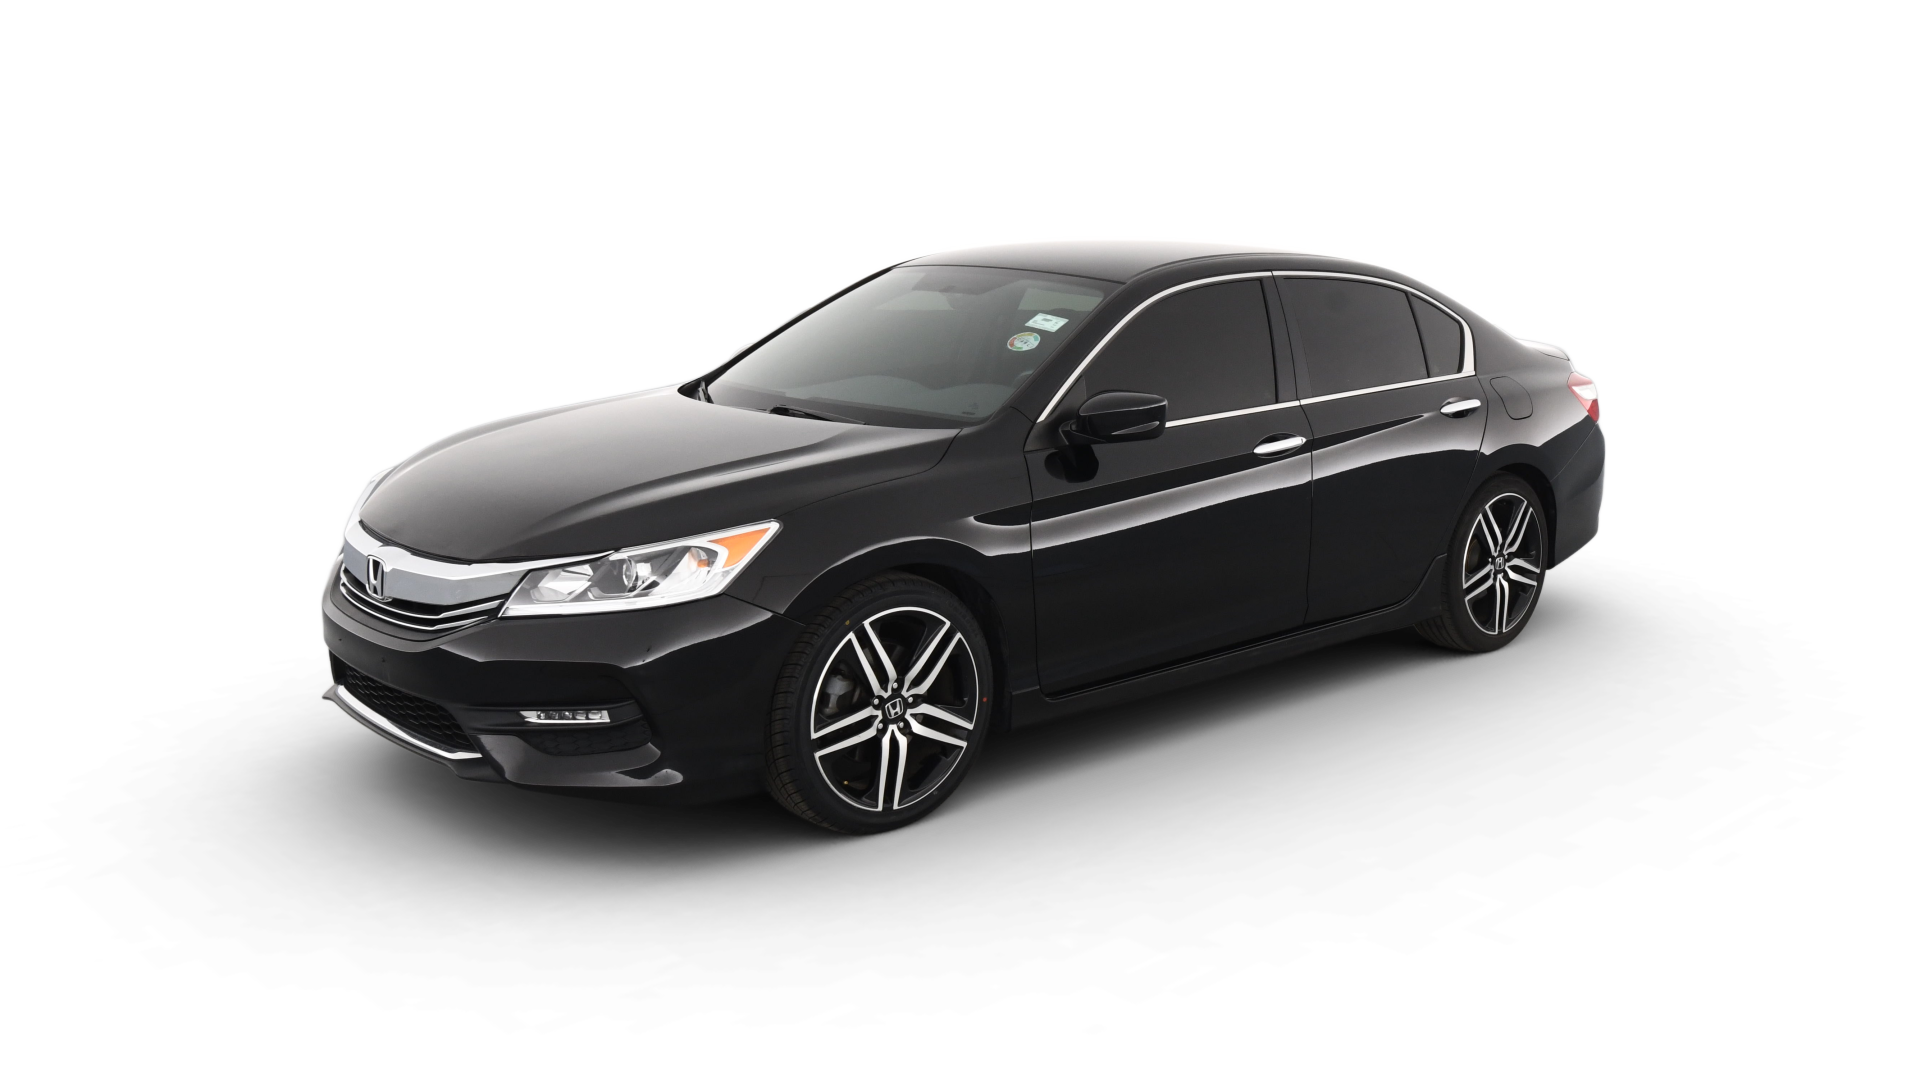 Used Honda Accord For Sale Online | Carvana